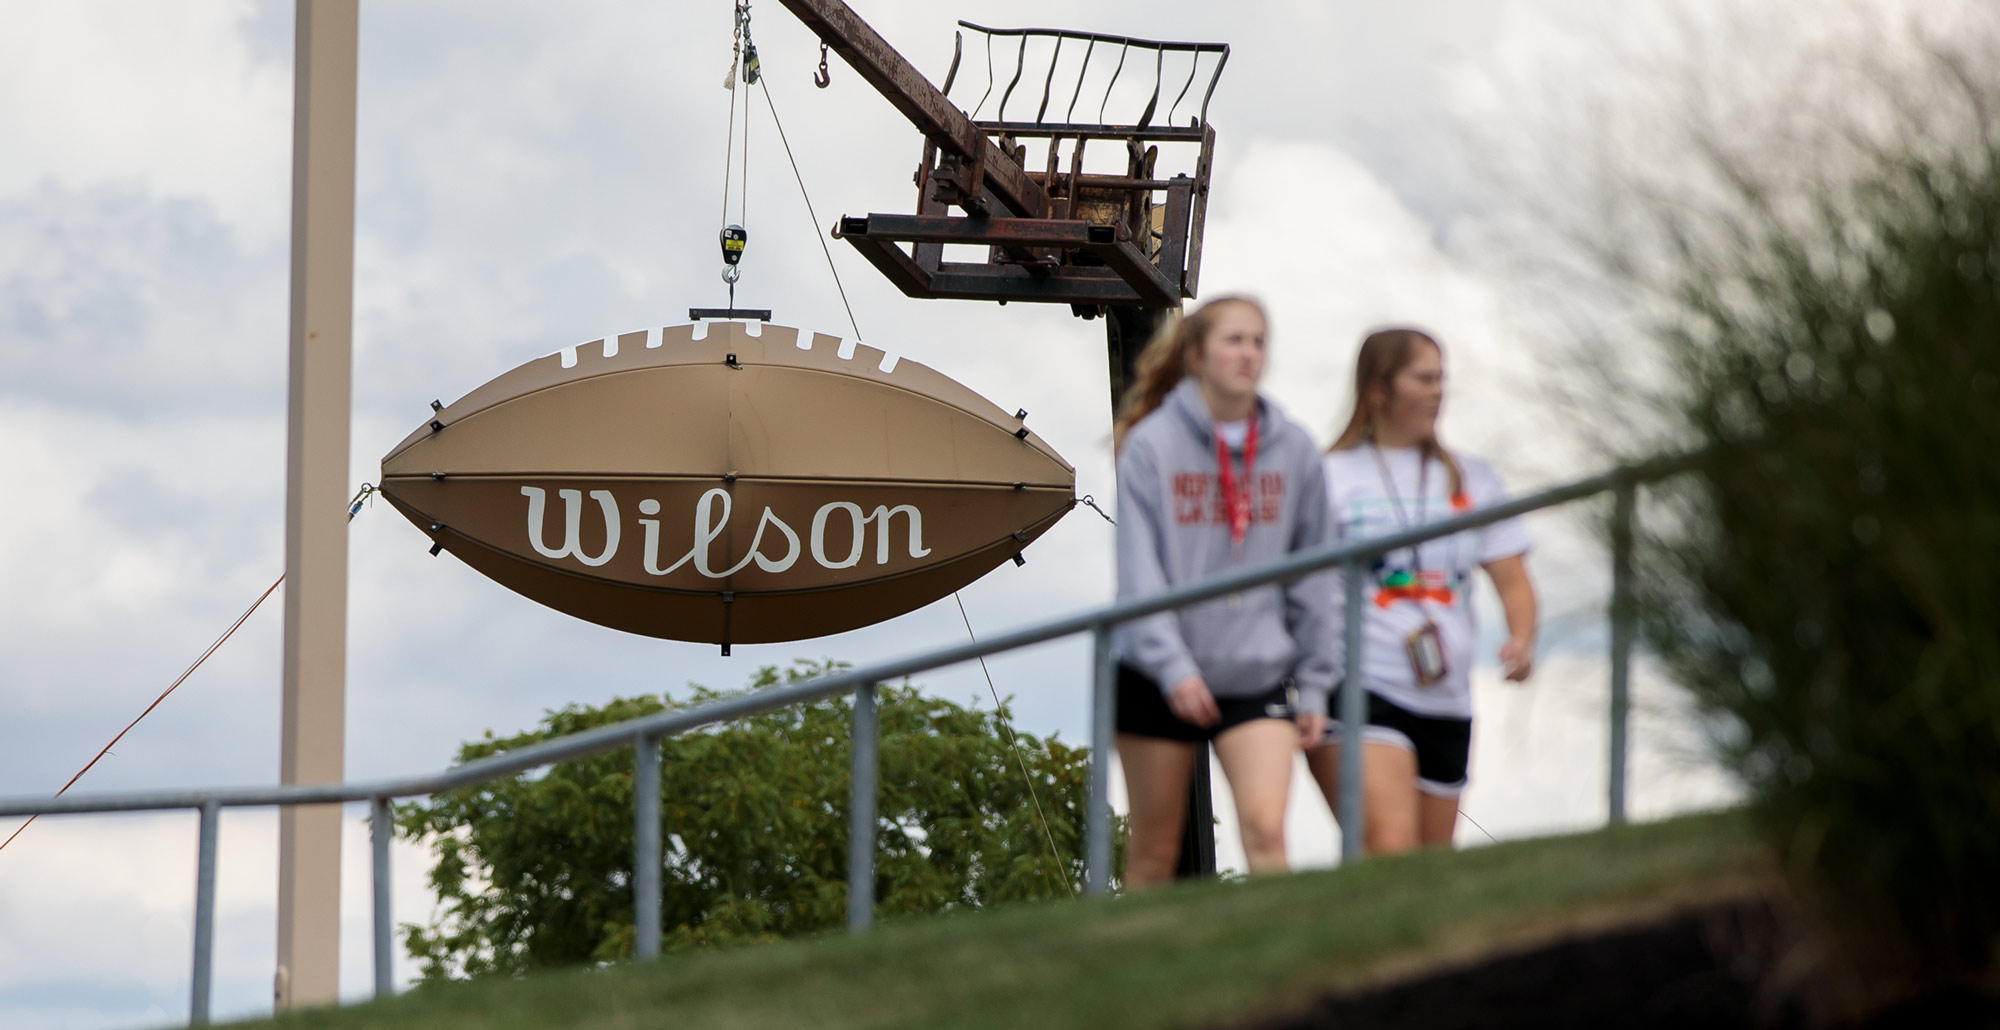 Students walk past the giant Wilson football outside of Dial-Roberson Stadium on the campus of Ohio Northern University.